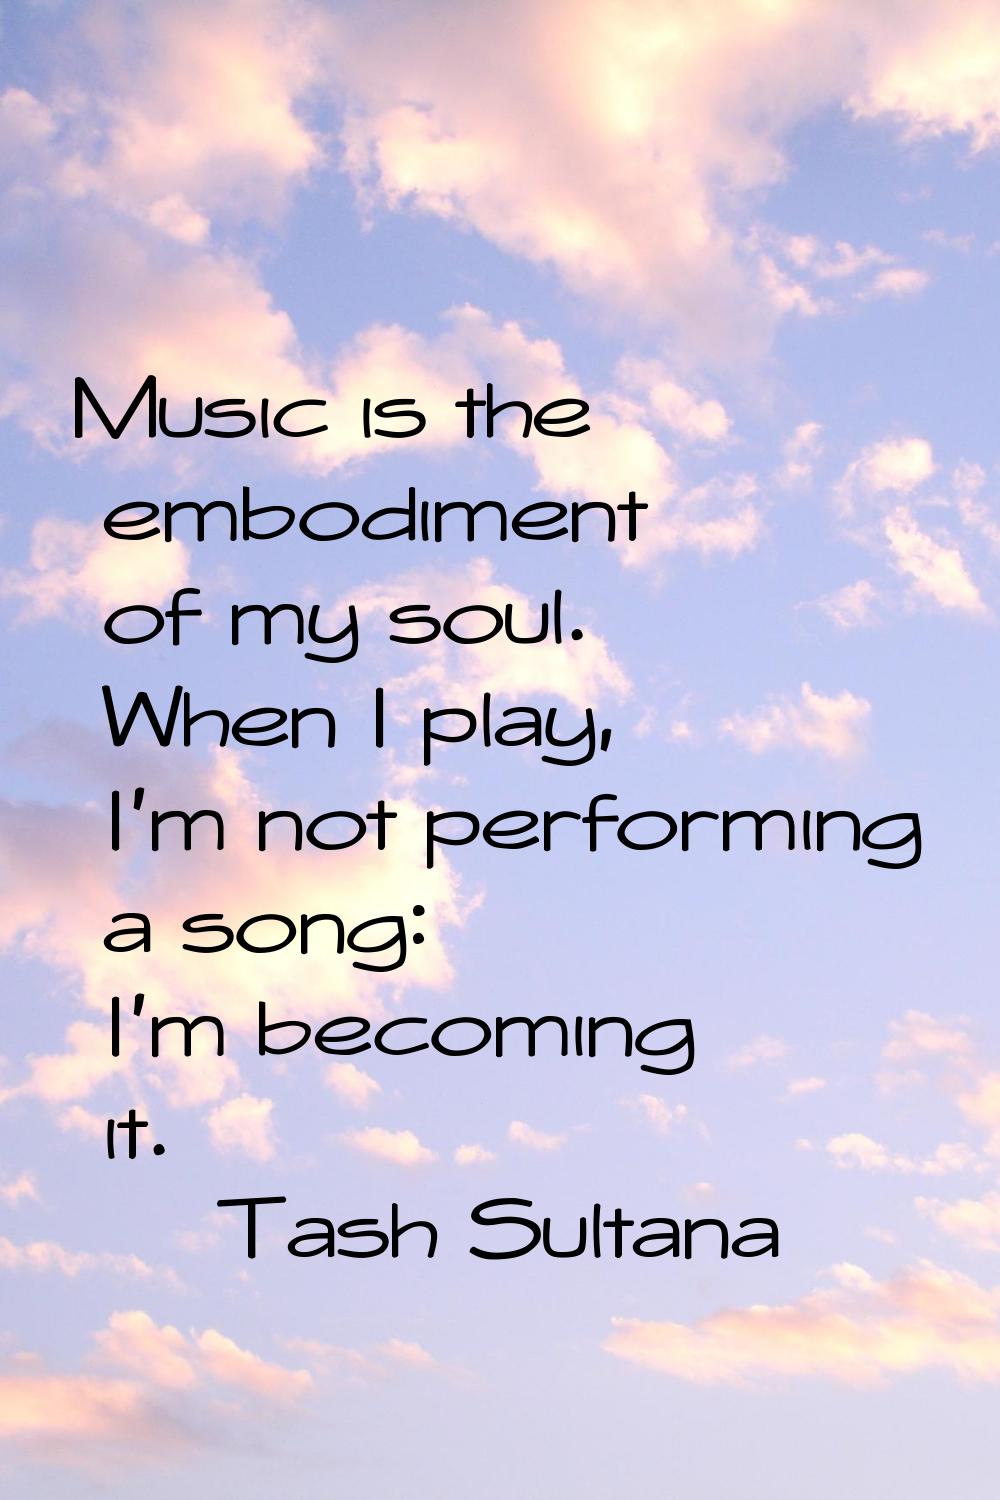 Music is the embodiment of my soul. When I play, I'm not performing a song: I'm becoming it.